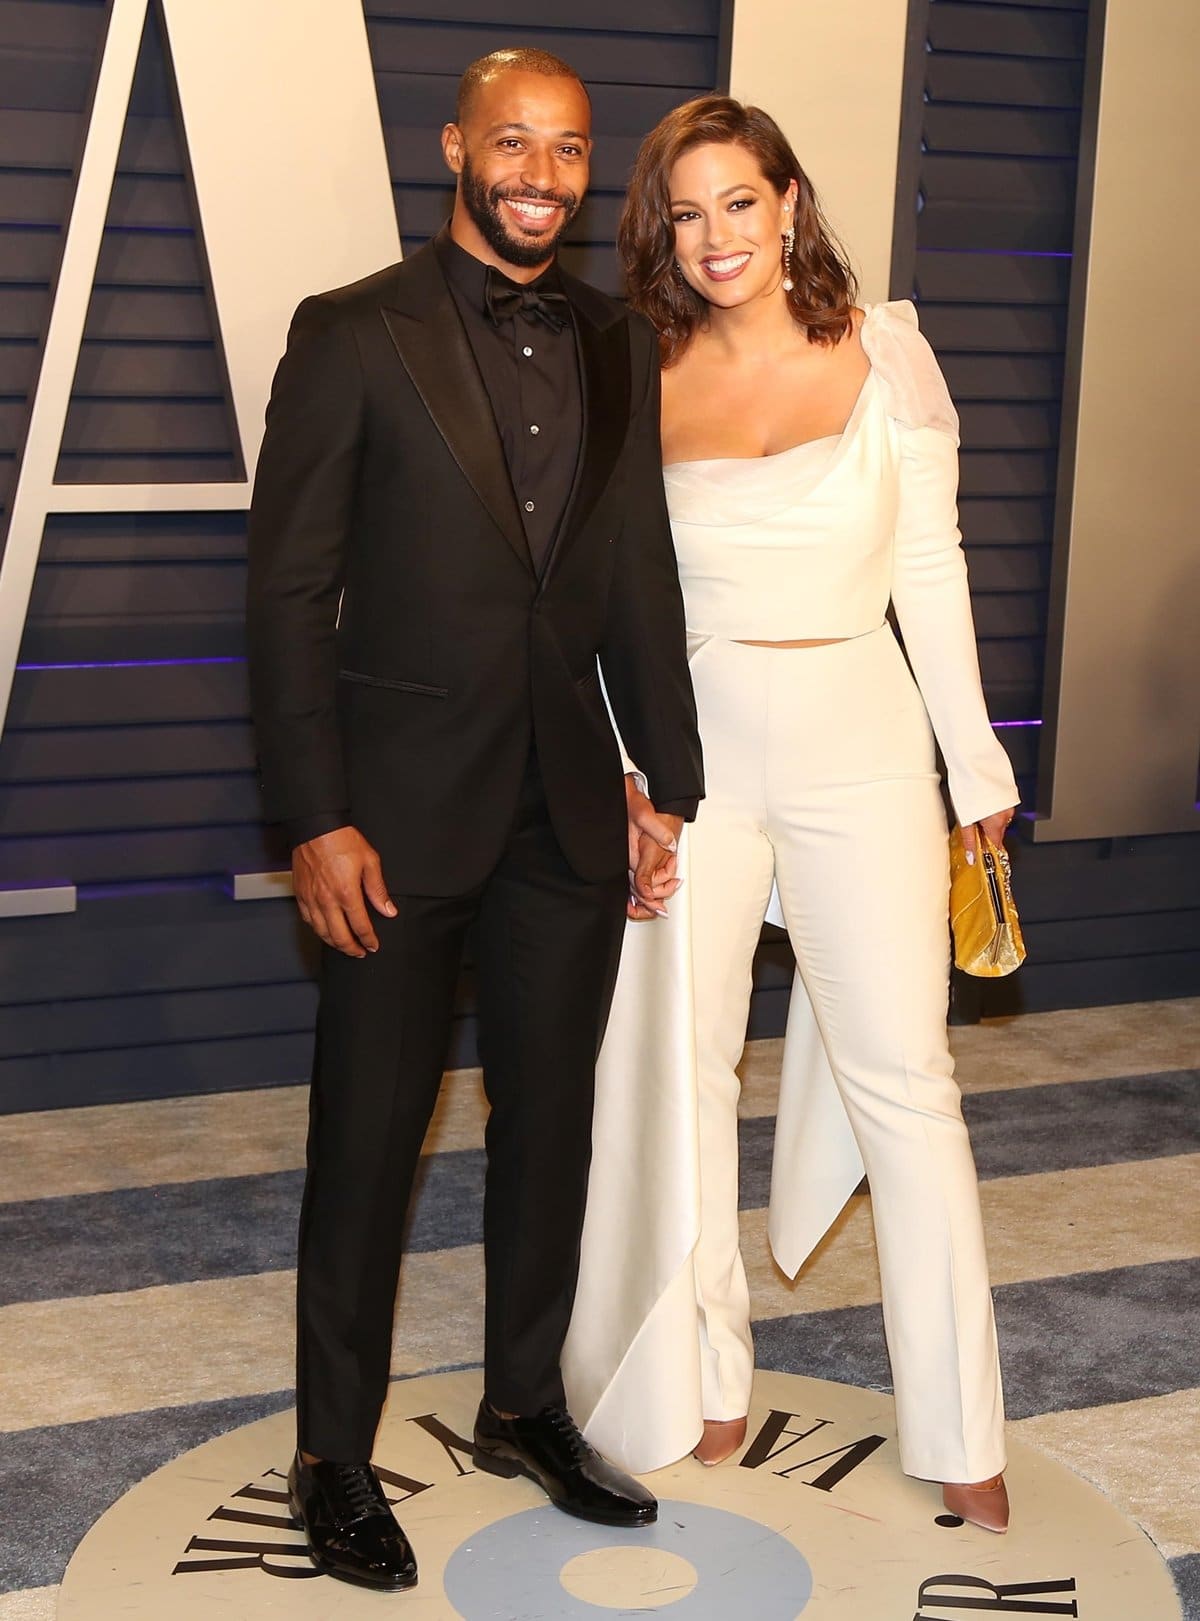 Supermodel Ashley Graham met her husband, Justin Ervin, in a church elevator and married in 2010